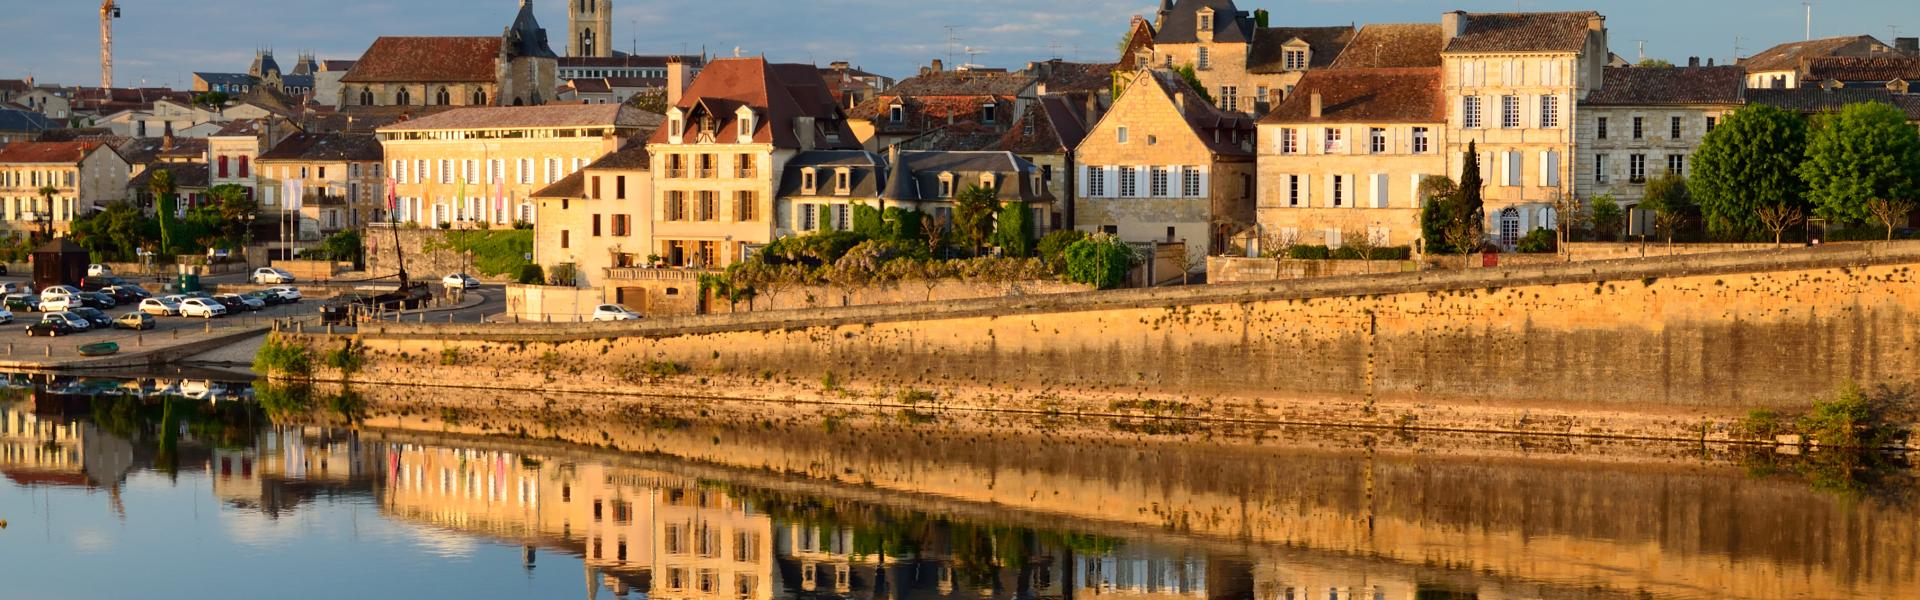 Holiday lettings & accommodation in Bergerac - HomeToGo